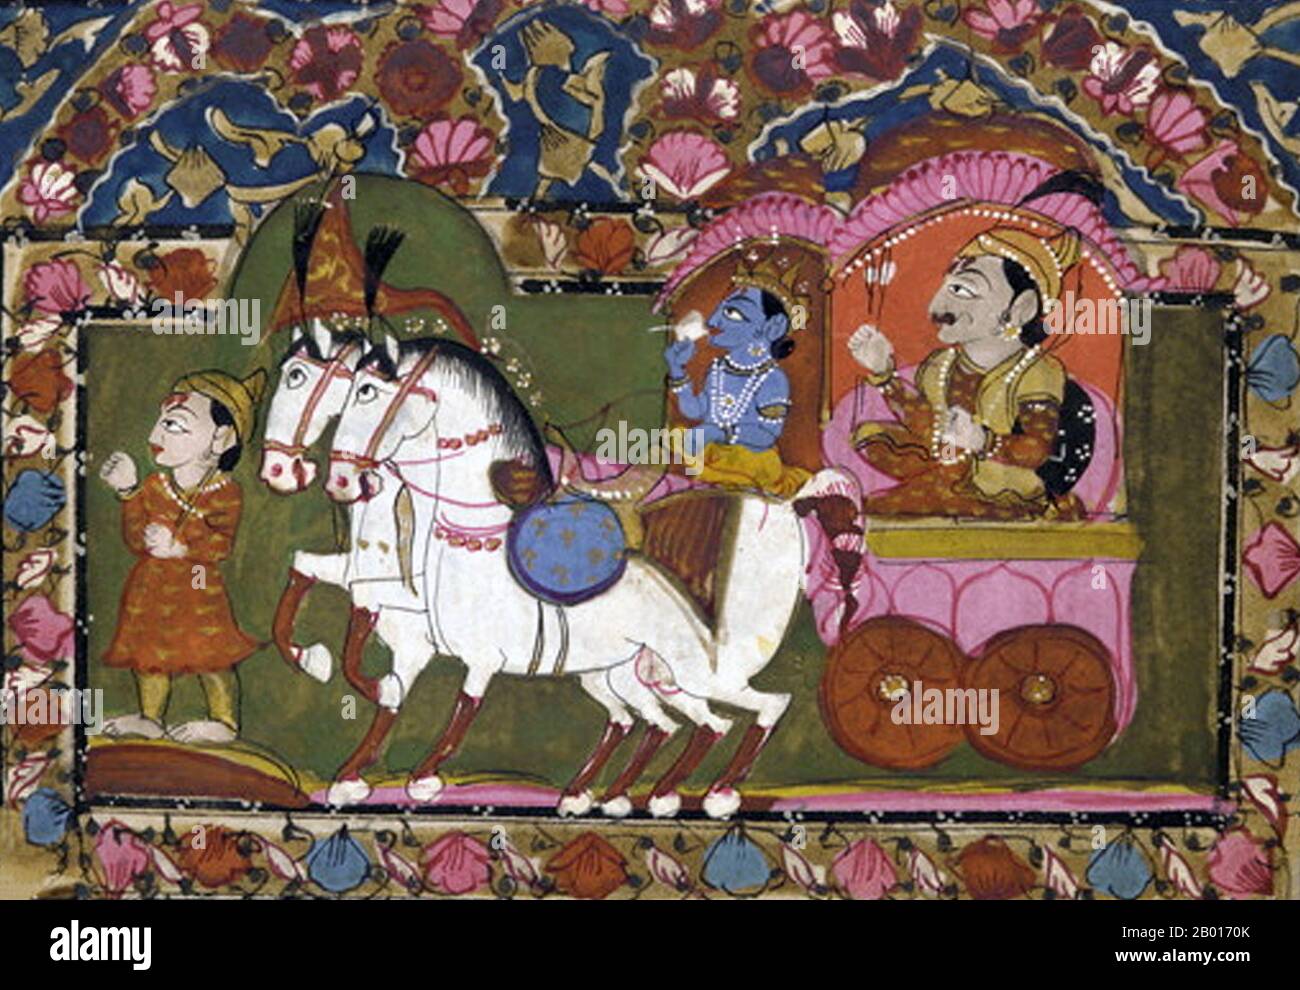 India: Krishna and Arjuna on a chariot. Carpet, c. 18th-19th century. This  famous scene from Hindu mythology features the god Krishna with his cousin,  Prince Arjuna, on a chariot heading into war